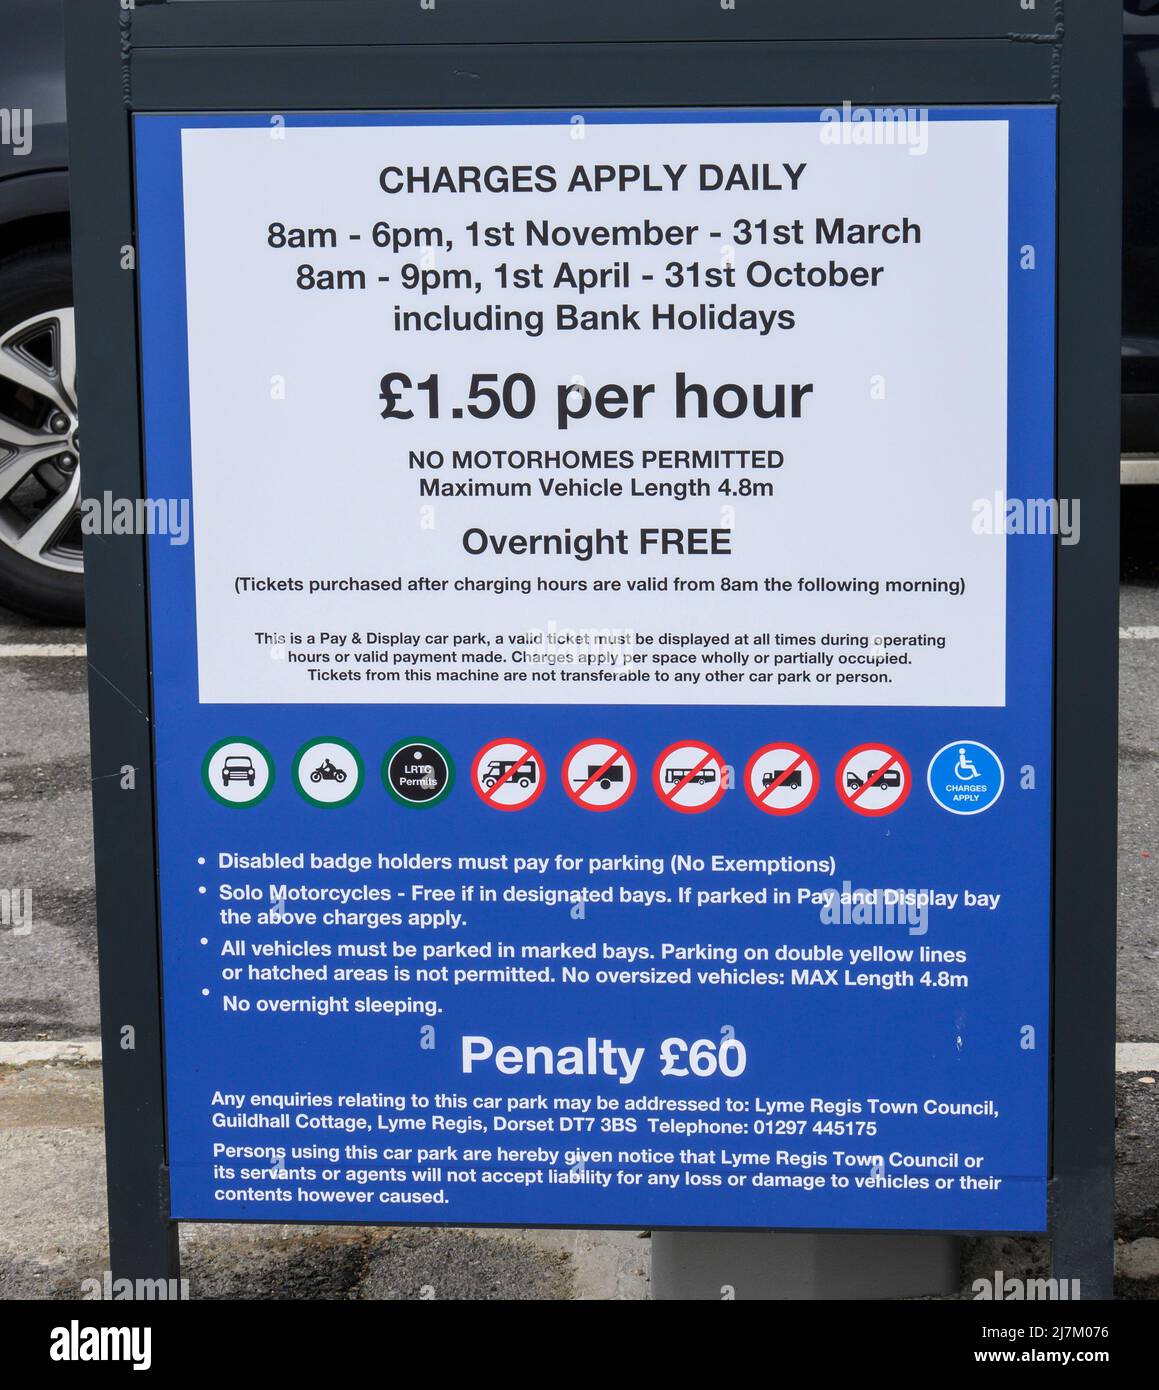 Lyme Regis, Dorset, UK. 10th May, 2022. UK News; Cost of Living: Hospitality businesses and small shops in many of England's coastal resorts are struggling to recruit staff for the holiday season. Pictured is a notice detailing car park charges at Monmouth Beach Carpark. It is has been speculated locally that the high cost of housing in the town, poor public transport links, and the recent prohibitive hikes in the cost of parking may be factors contributing to the staff shortage. Credit: Celia McMahon/Alamy Live News Stock Photo